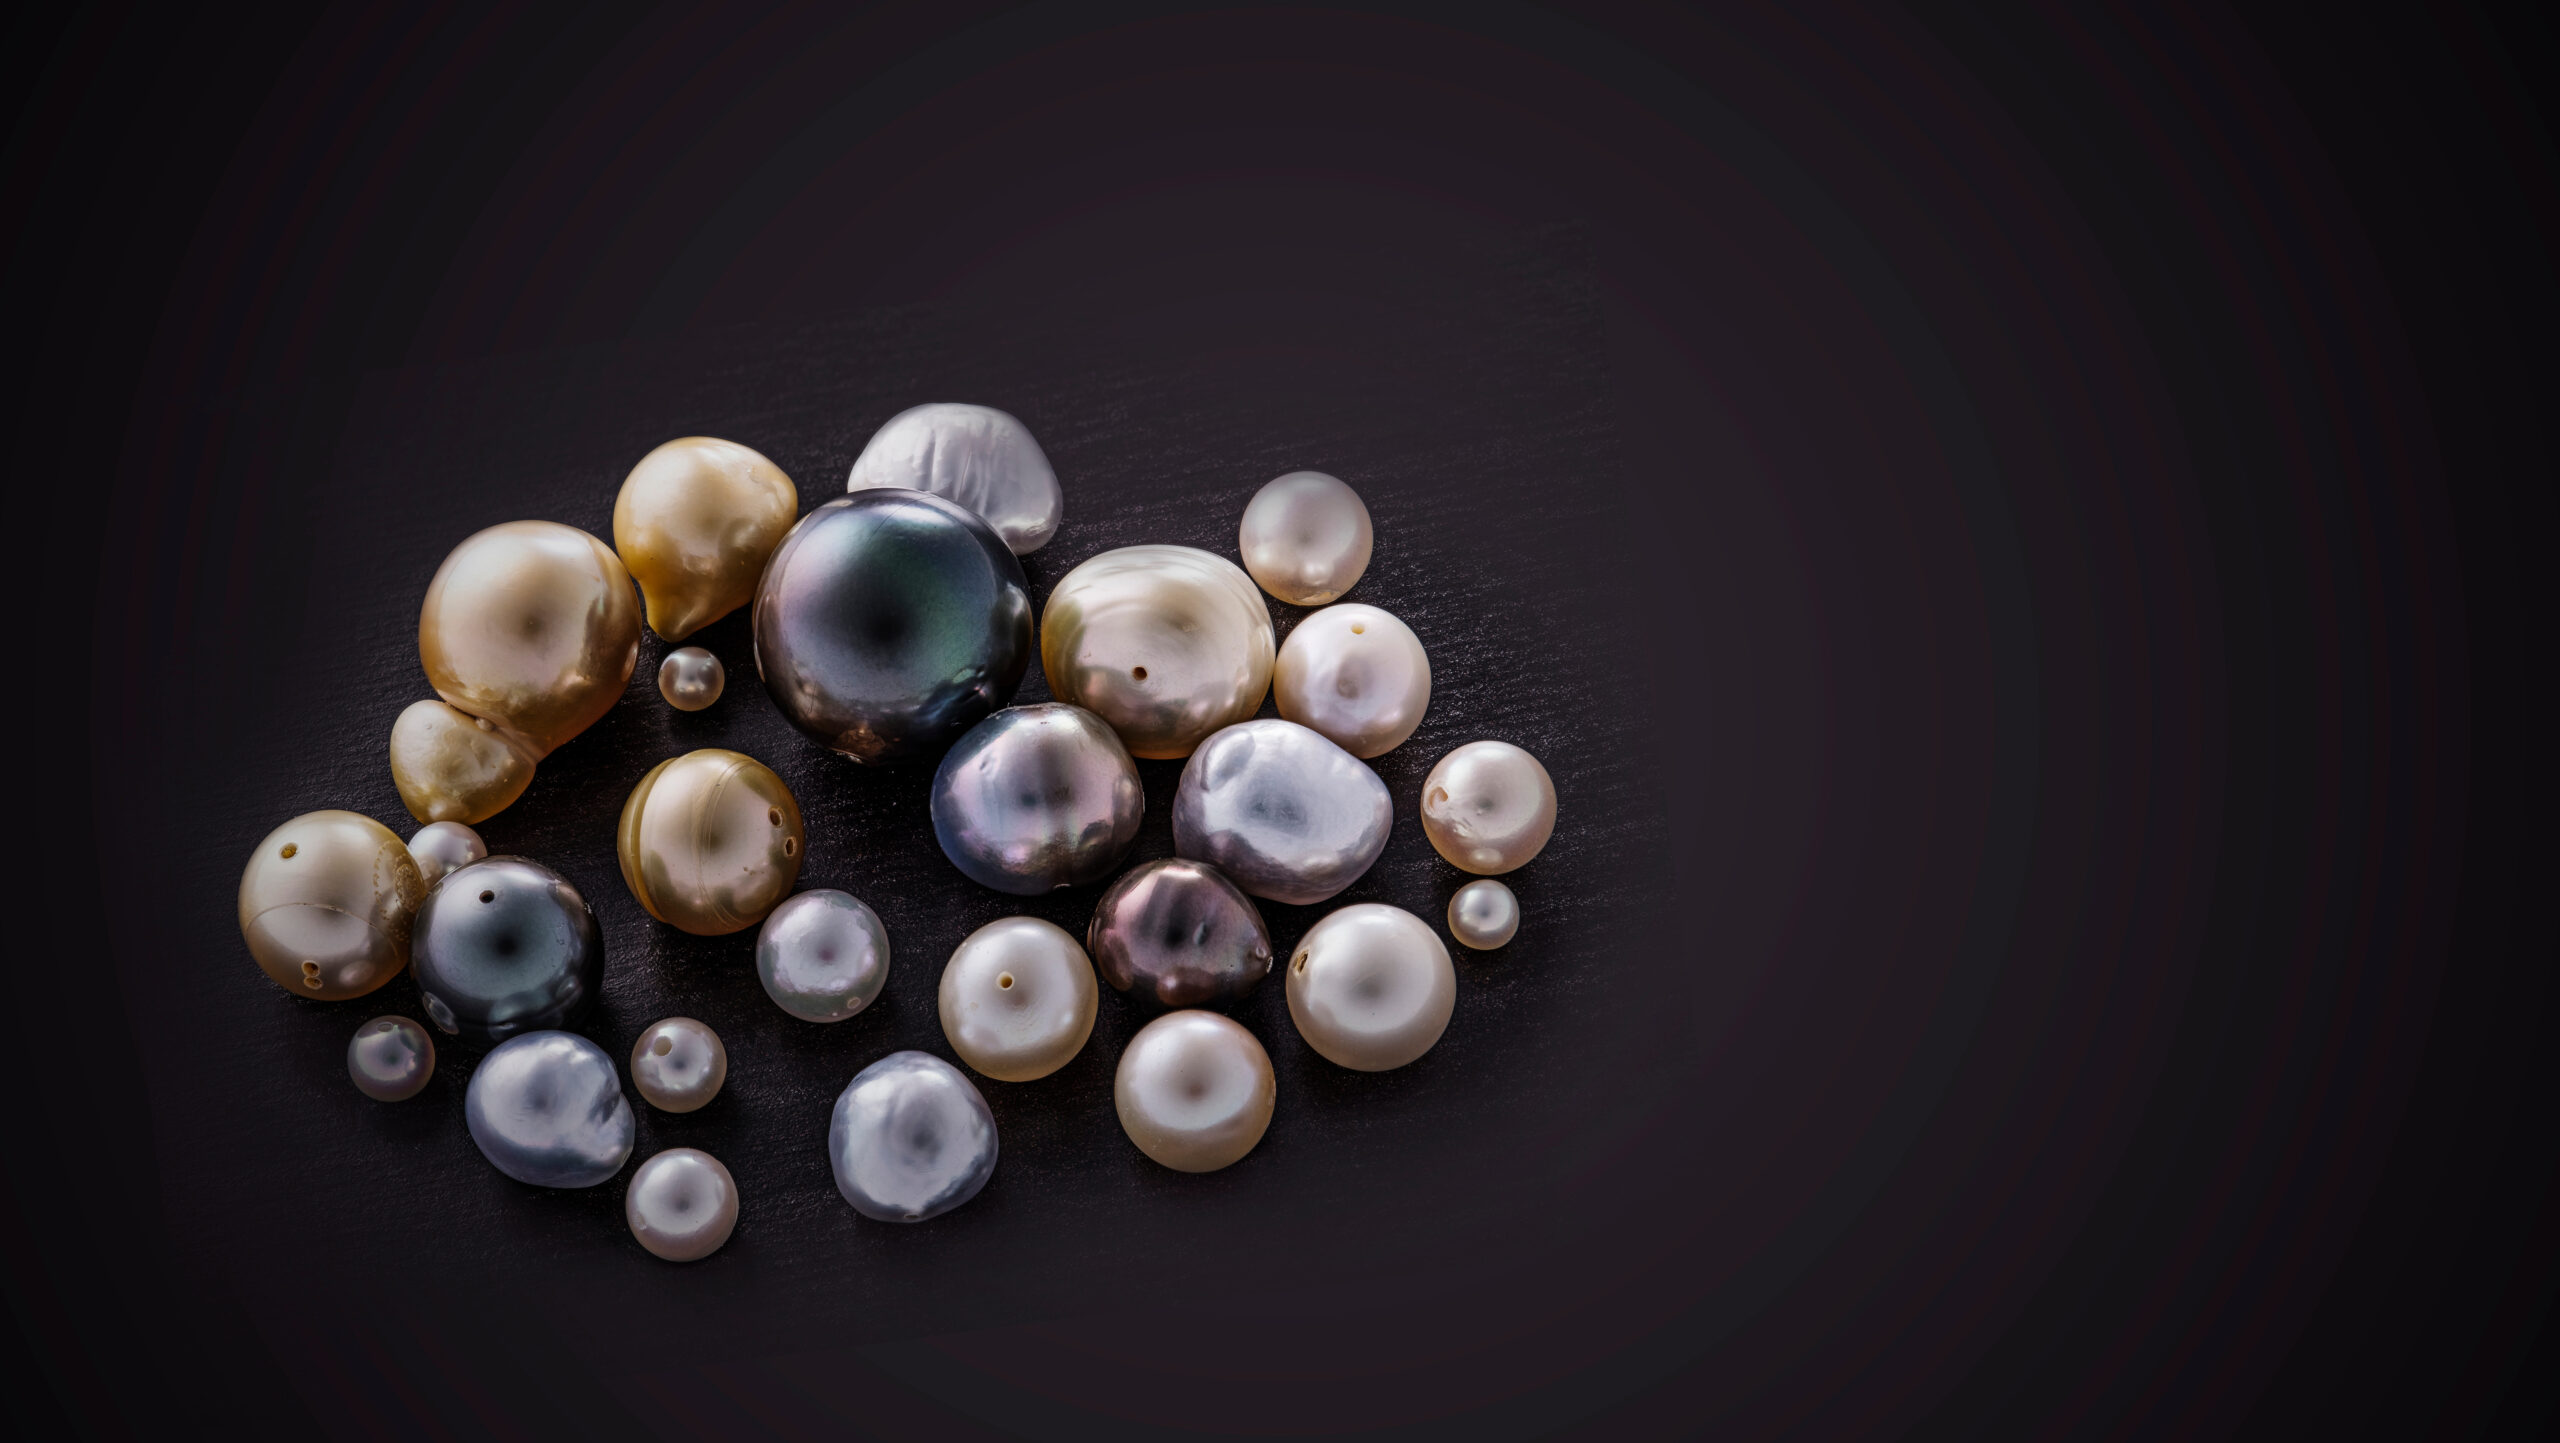 Set,Of,Pearl,Collage,On,Black,Background.